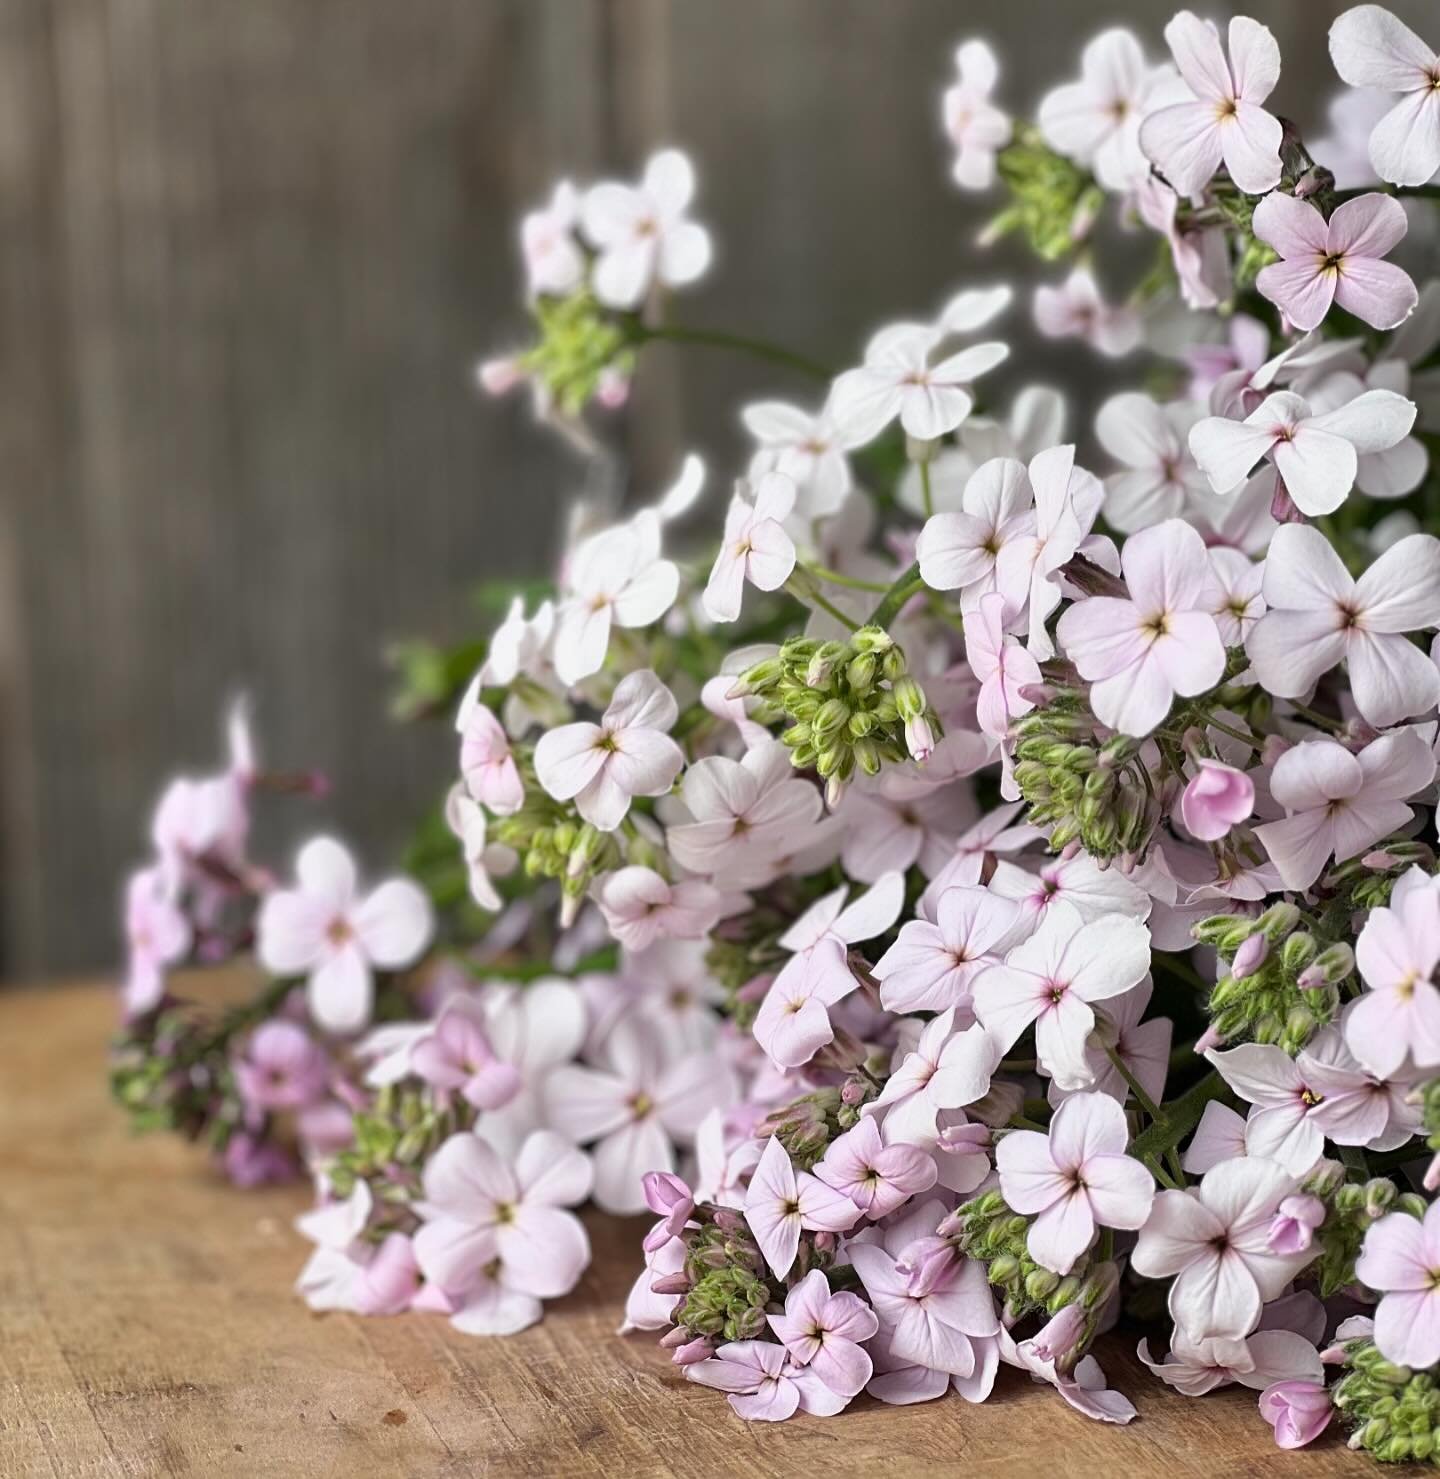 I wait for them every spring! My favorite filler flower, so delicate and beautiful - Sweet Rocket. 

#spring #springflowers #lilac #pnwspring #mothersday #mothersdaygift #theflowershed #prettyflowerfarm